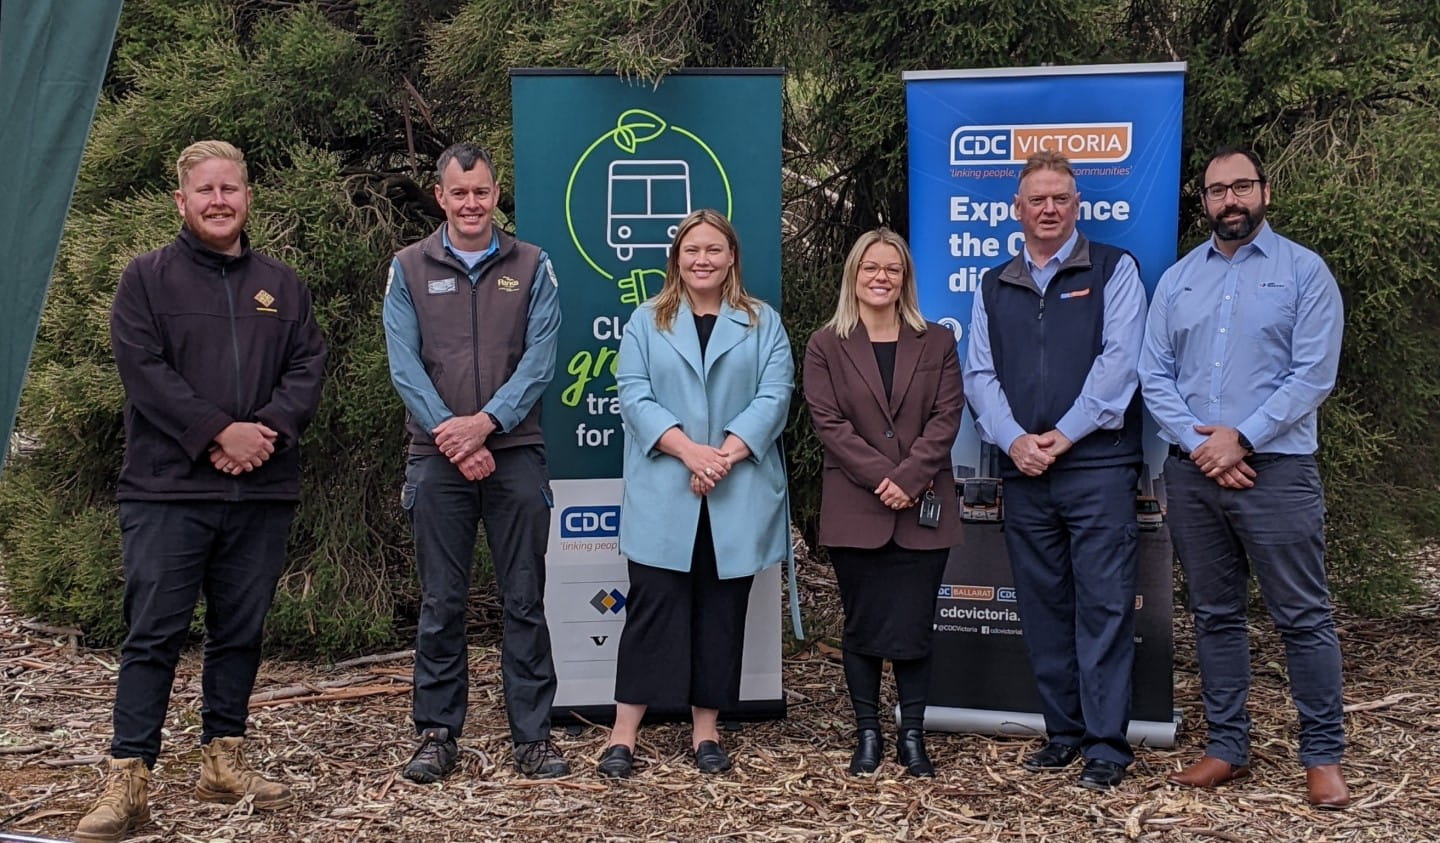 From left to right: Wadawurrung Traditional Owners Aboriginal Corporation General Manager Greg Robinson, Parks Victoria District Manager Stuart Lardner, Member for Lara Ella George, CMV Group's Jess Brzezicki, CDC Victoria CEO Jeff Wilson, and CMV Group's Nick Curran at Serendip Sanctuary to announce a new sensory garden.